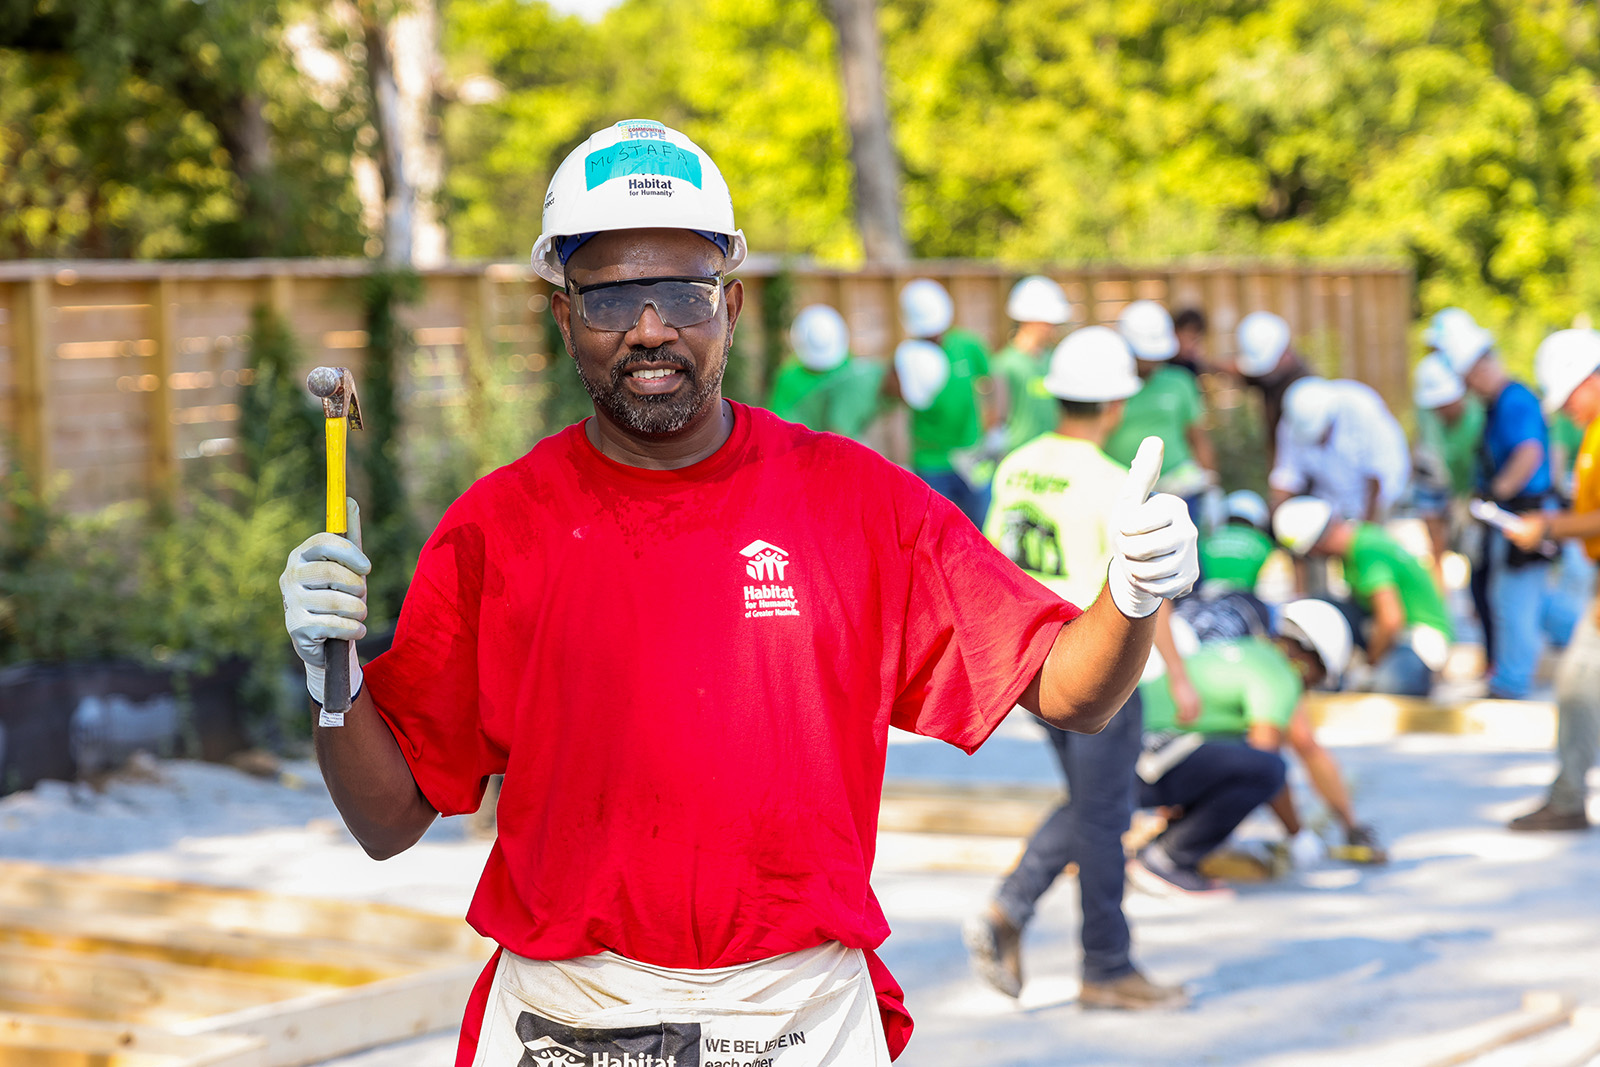 Mustafa, a future Habitat for Humanity homeowner, poses while working on a project in the Nasvhille area in August 2022. Photo courtesy of Habitat for Humanity of Greater Nashville